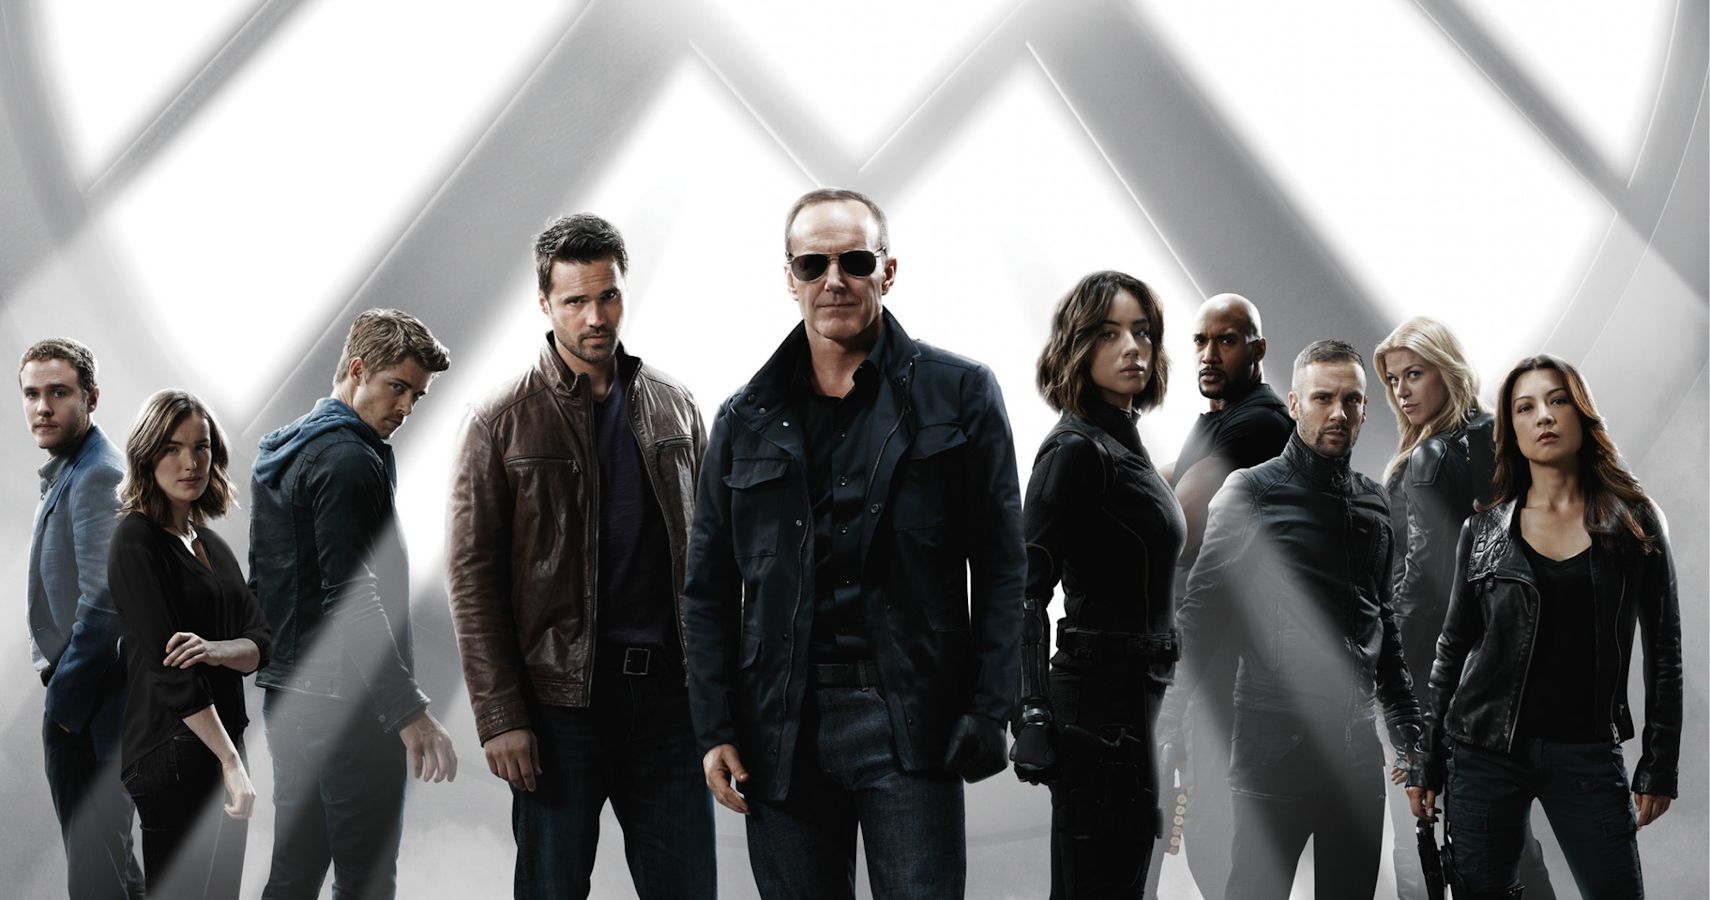 agent of shield season 1 all episodes download